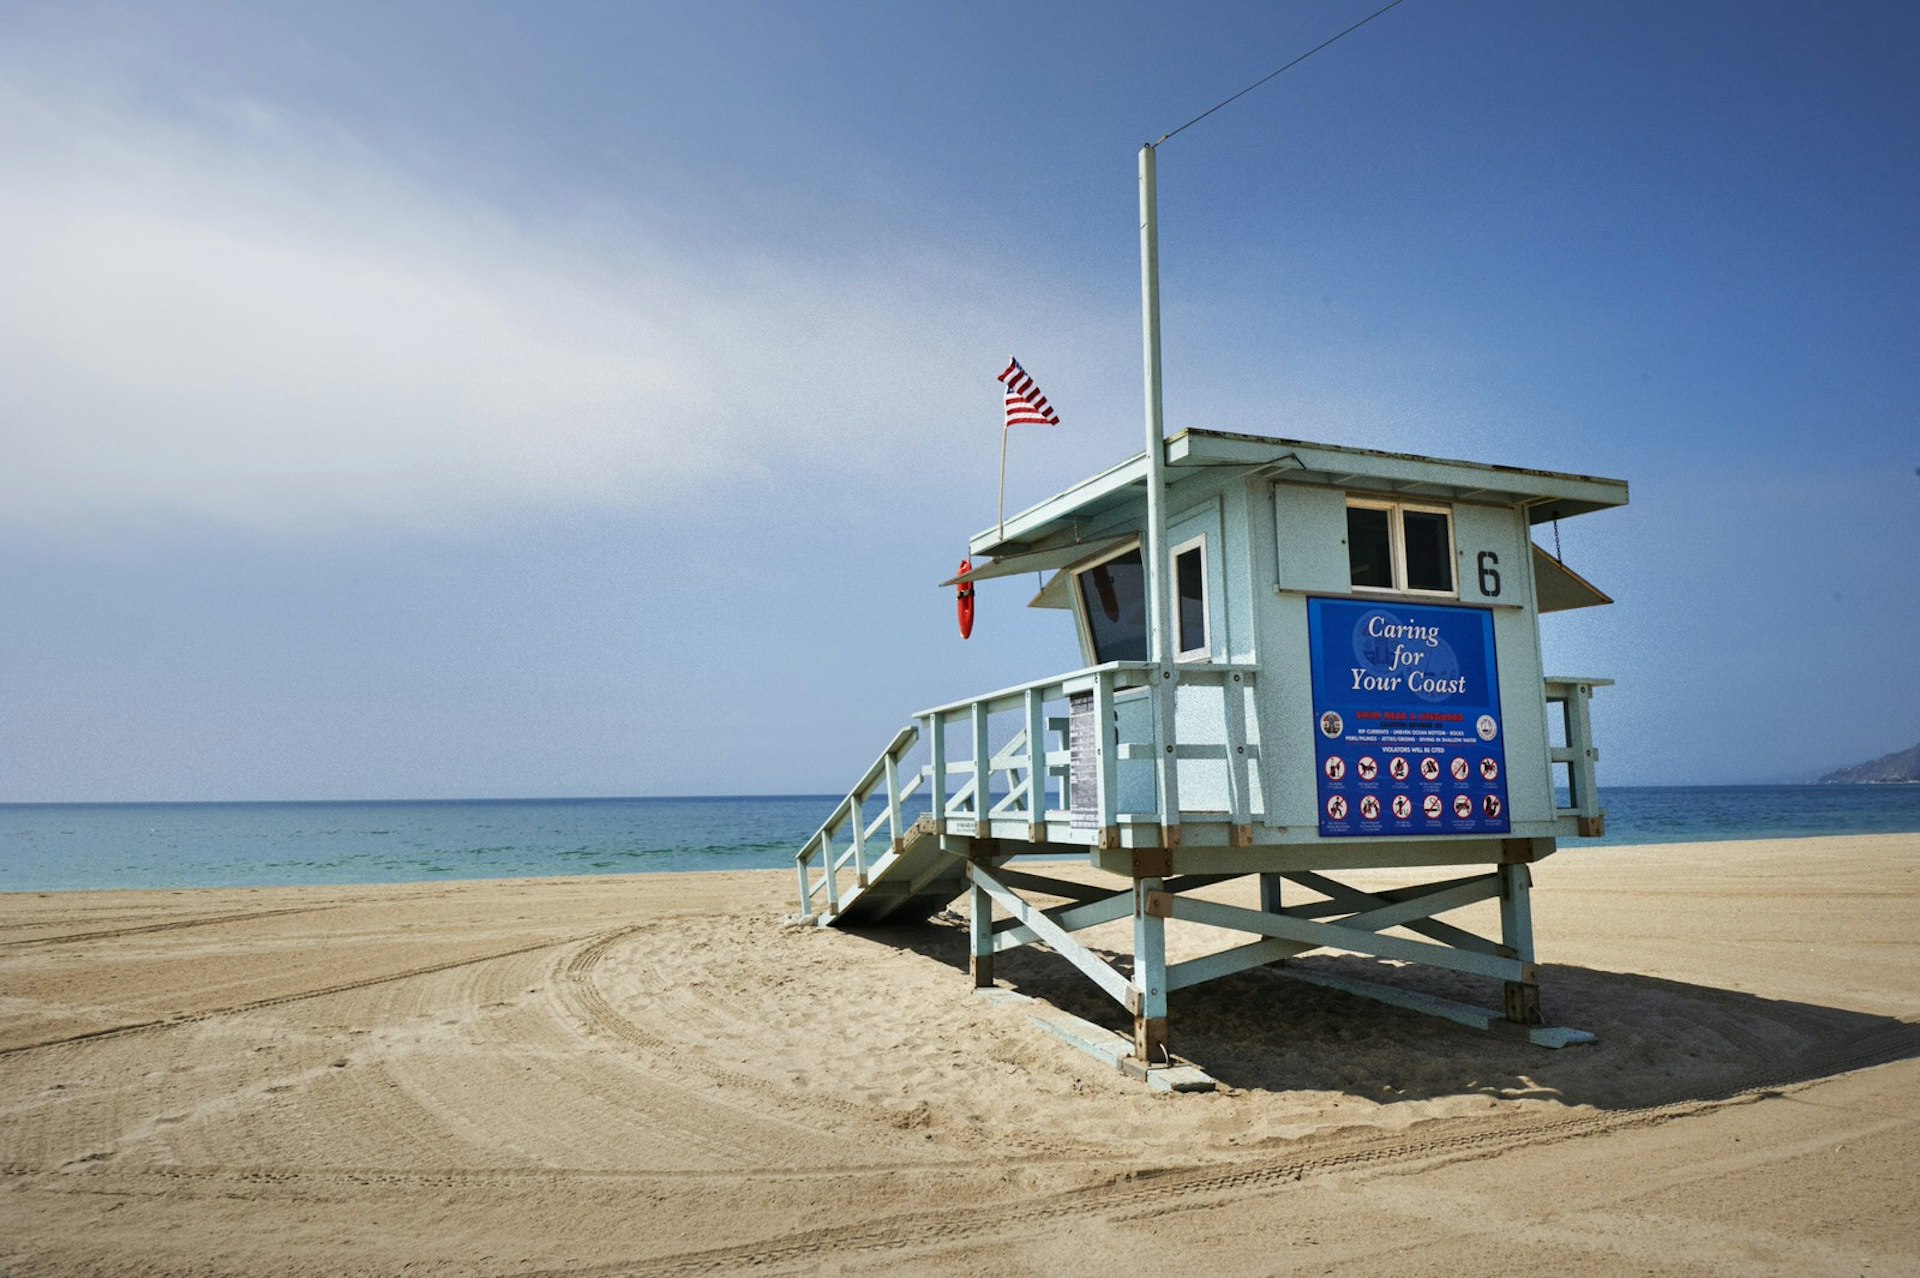 A lifeguard tower on Will Rogers State Beach © Simon Urwin / Lonely Planet